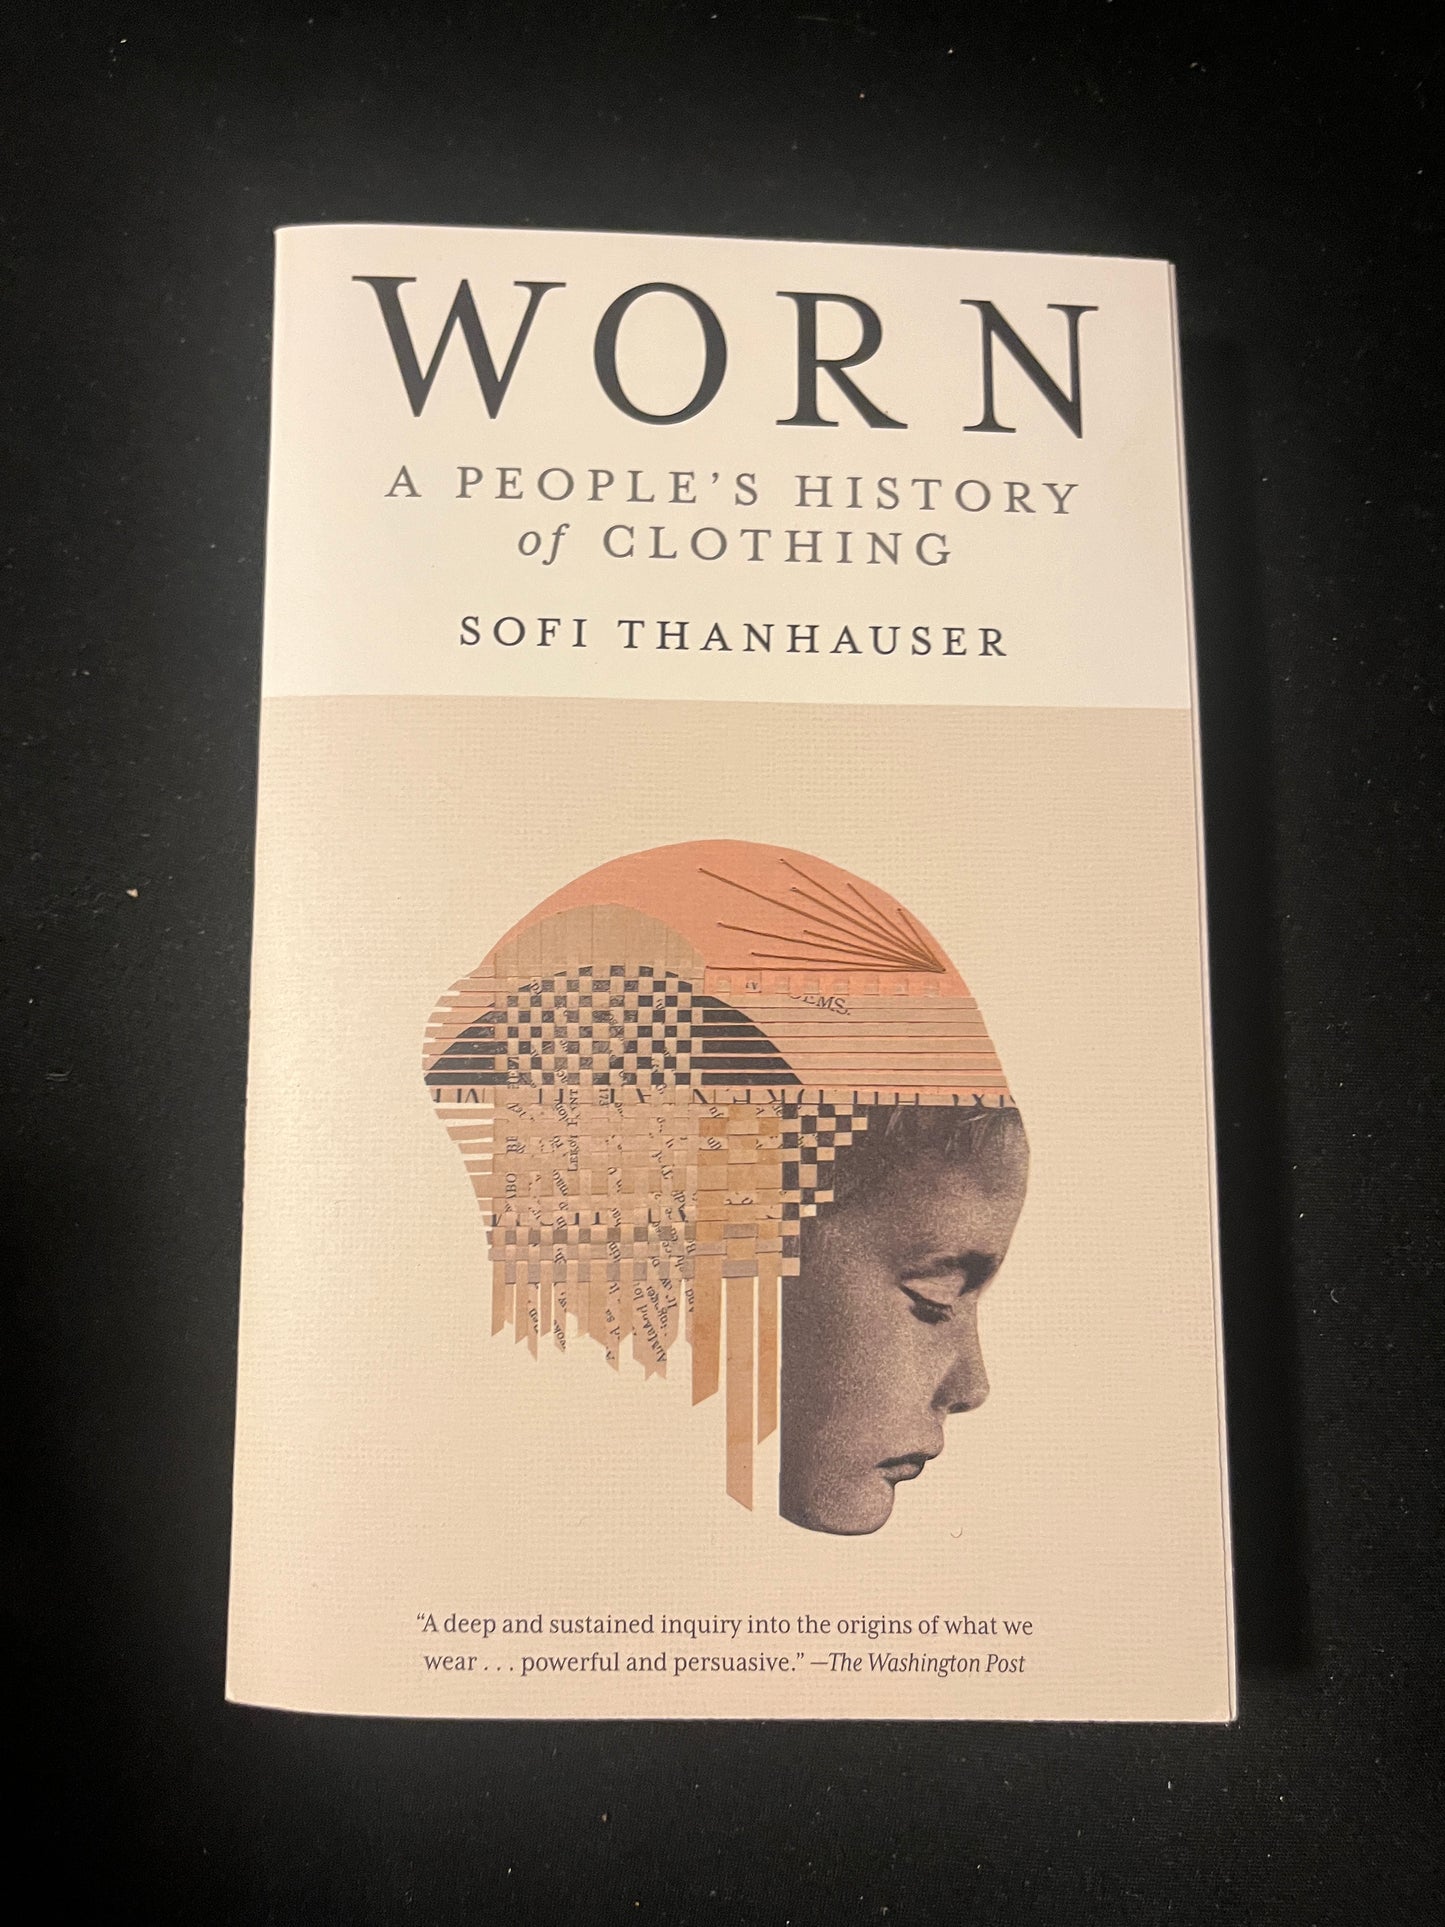 WORN: A PEOPLE'S HISTORY OF CLOTHING by Sofi Thanhauser